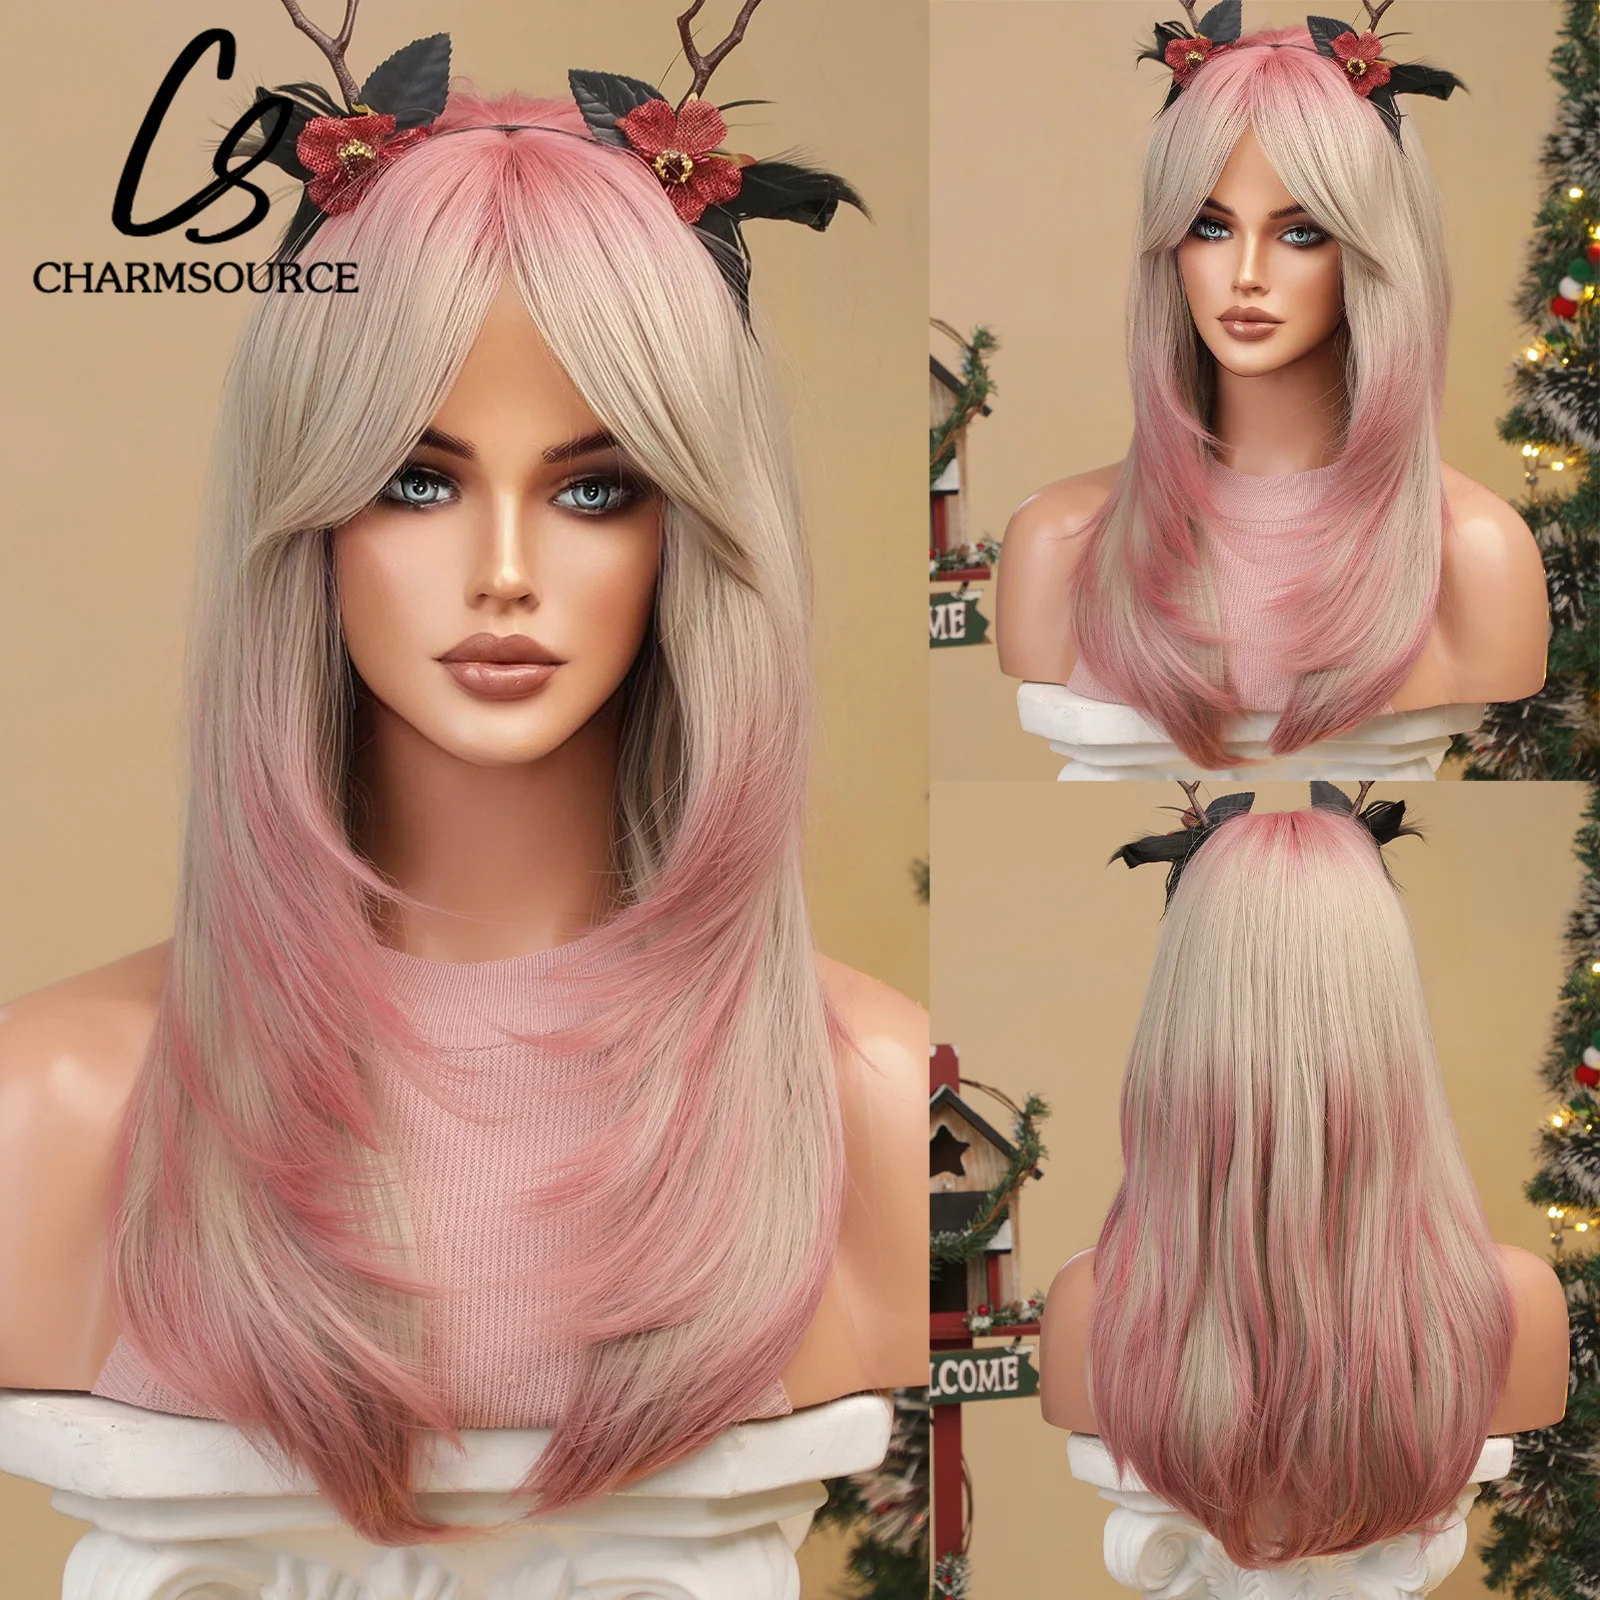 Natural Wavy Layered Synthetic Wigs Mix Beige With Pink Hair with Side Bangs for Women Daily Party Cosplay Heat Resistant Fiber консилер luxvisage тон 03 natural beige к6